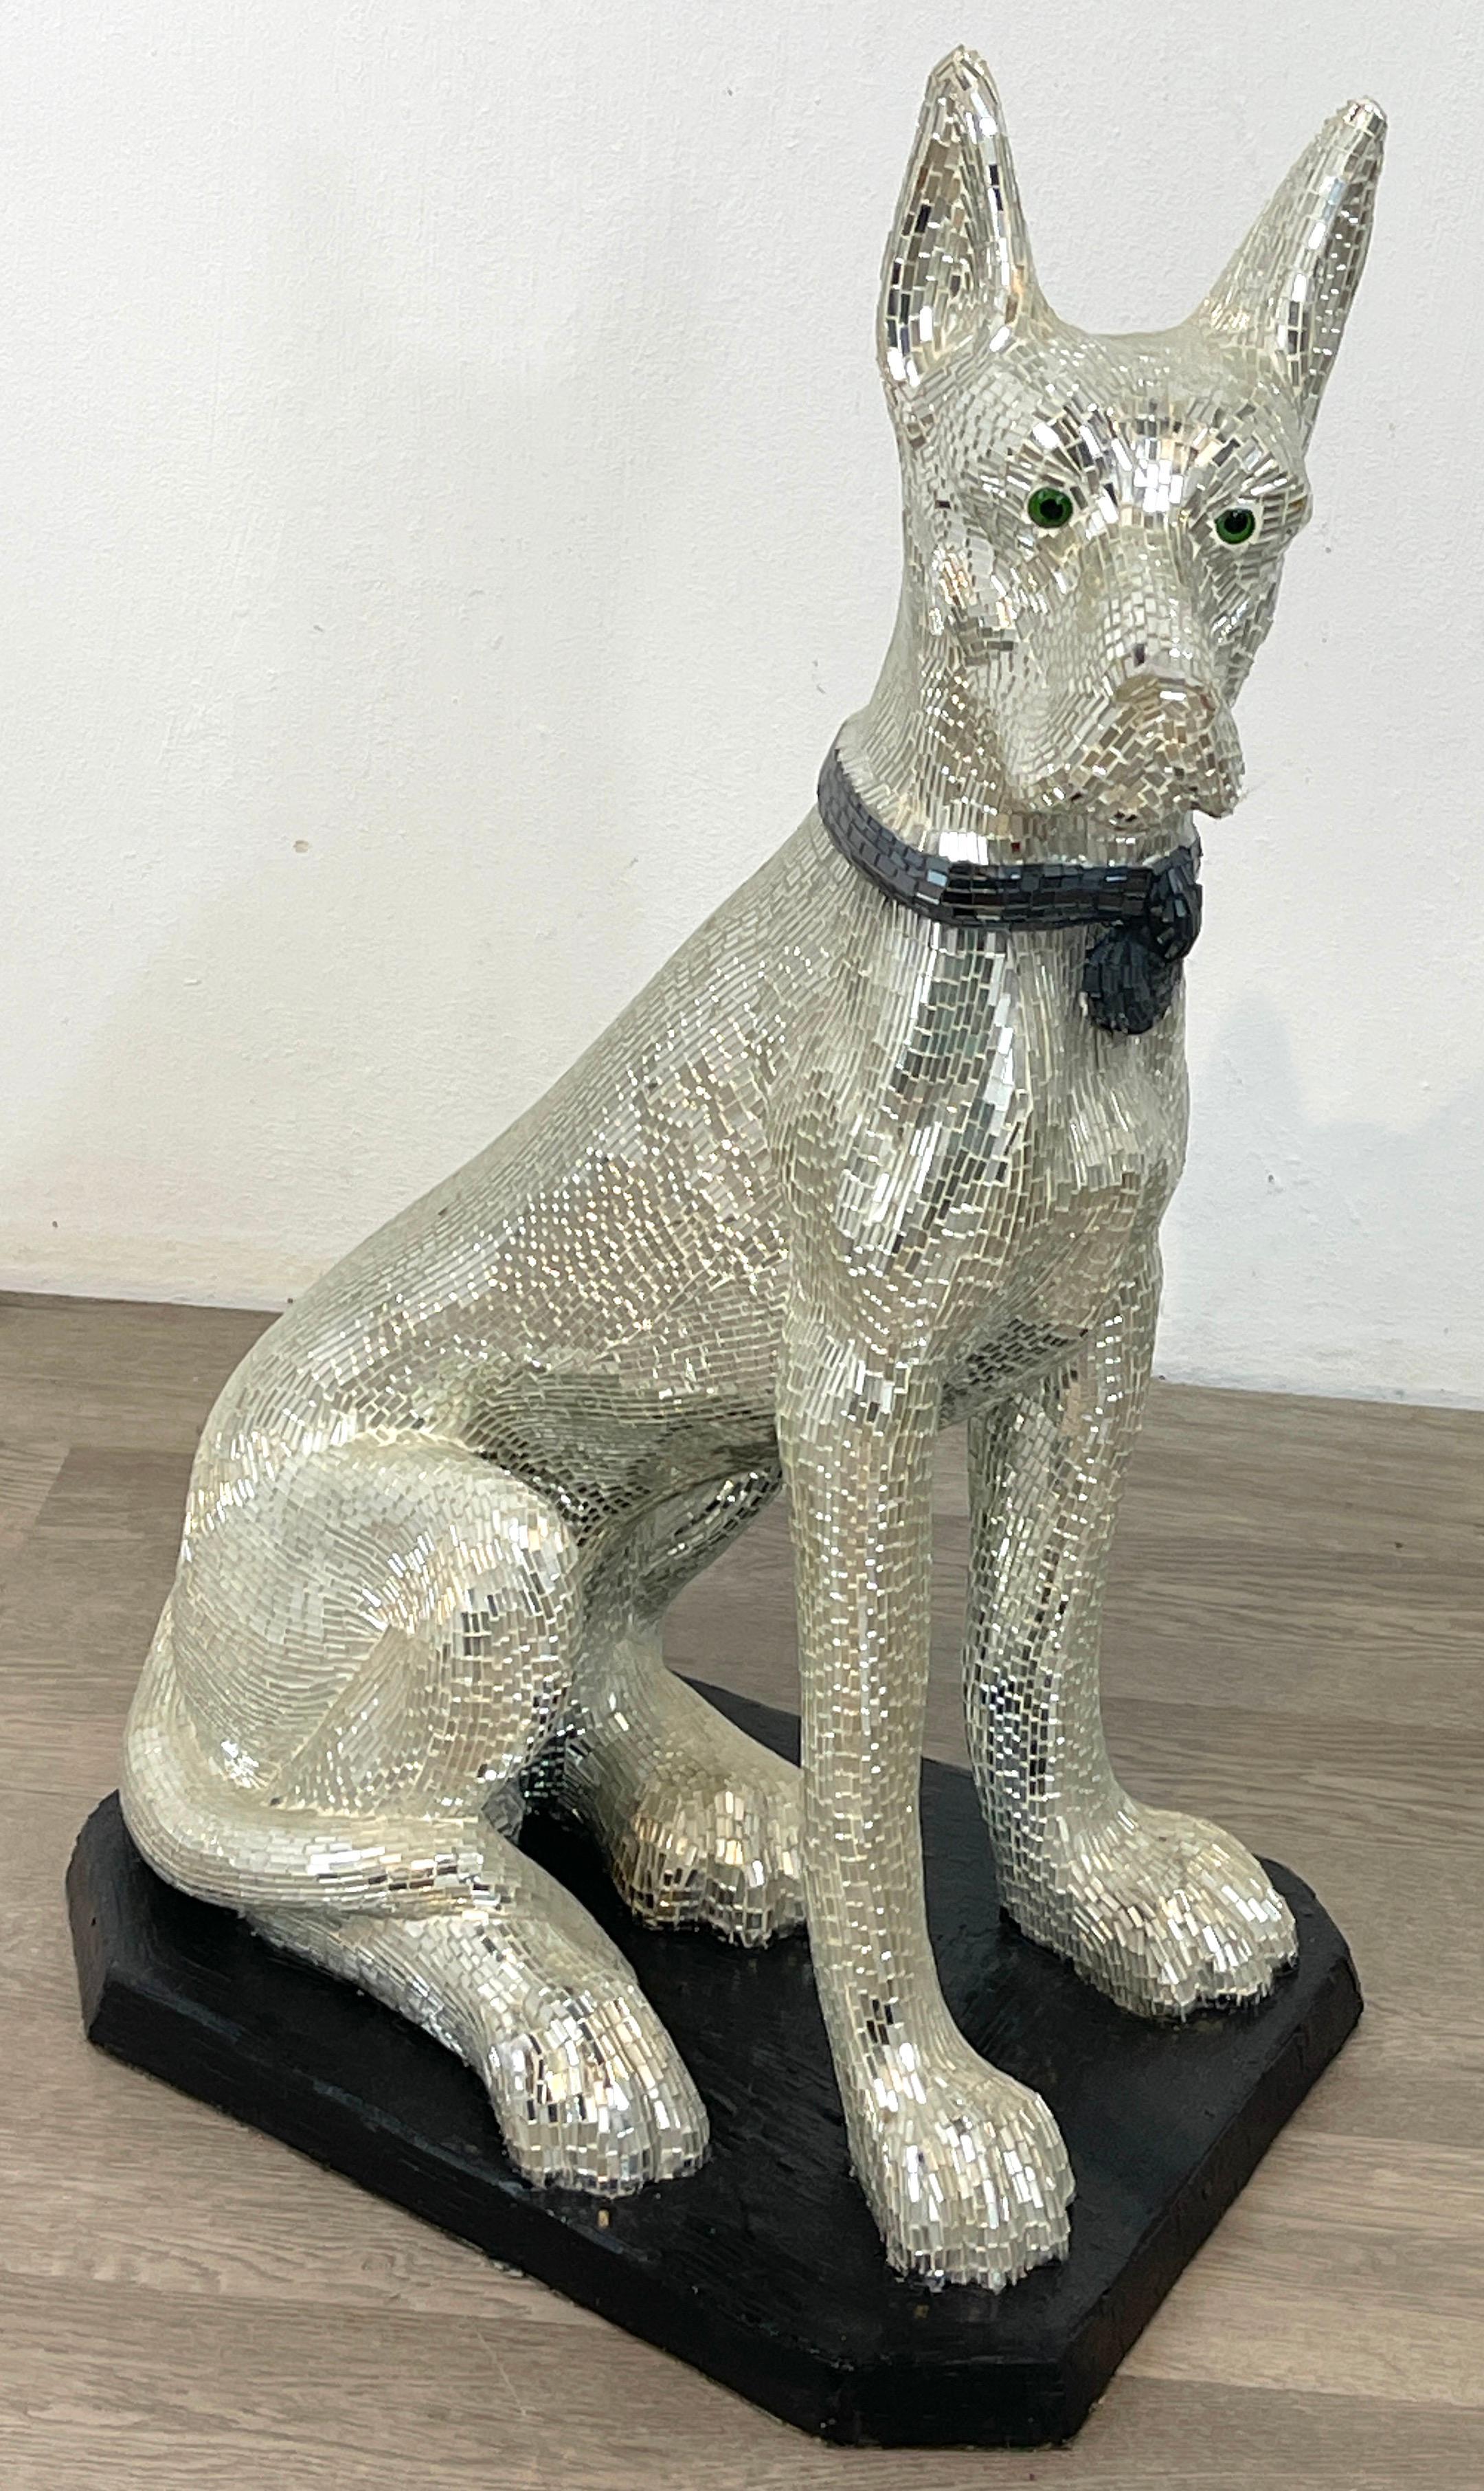 'Disco Dog' mirrored figure of seated great dane with collar
An ambitious work of countless inlaid mosaic mirror covering a seated dog with glass eyes, wearing a 'Sapphire' mirrored collar, resting on ebonized 19